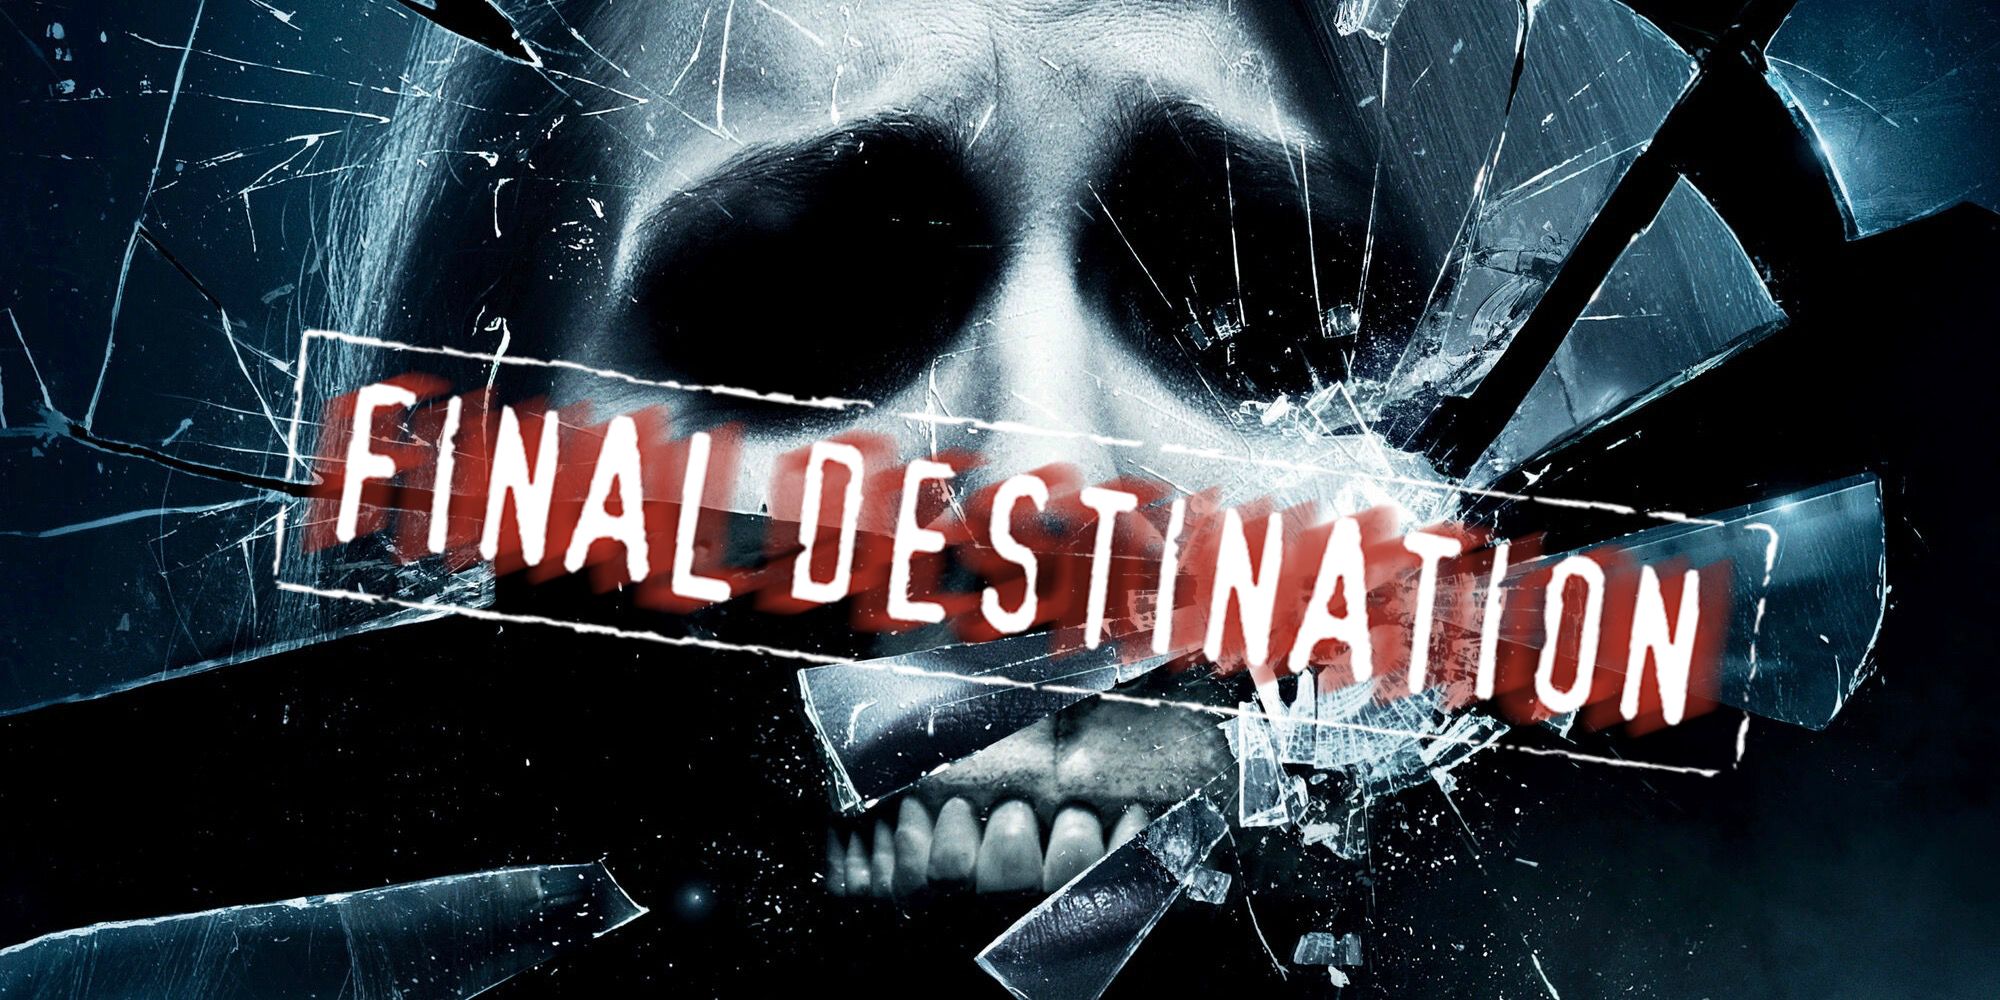 10 Things You Probably Didn’t Know About The Final Destination Series